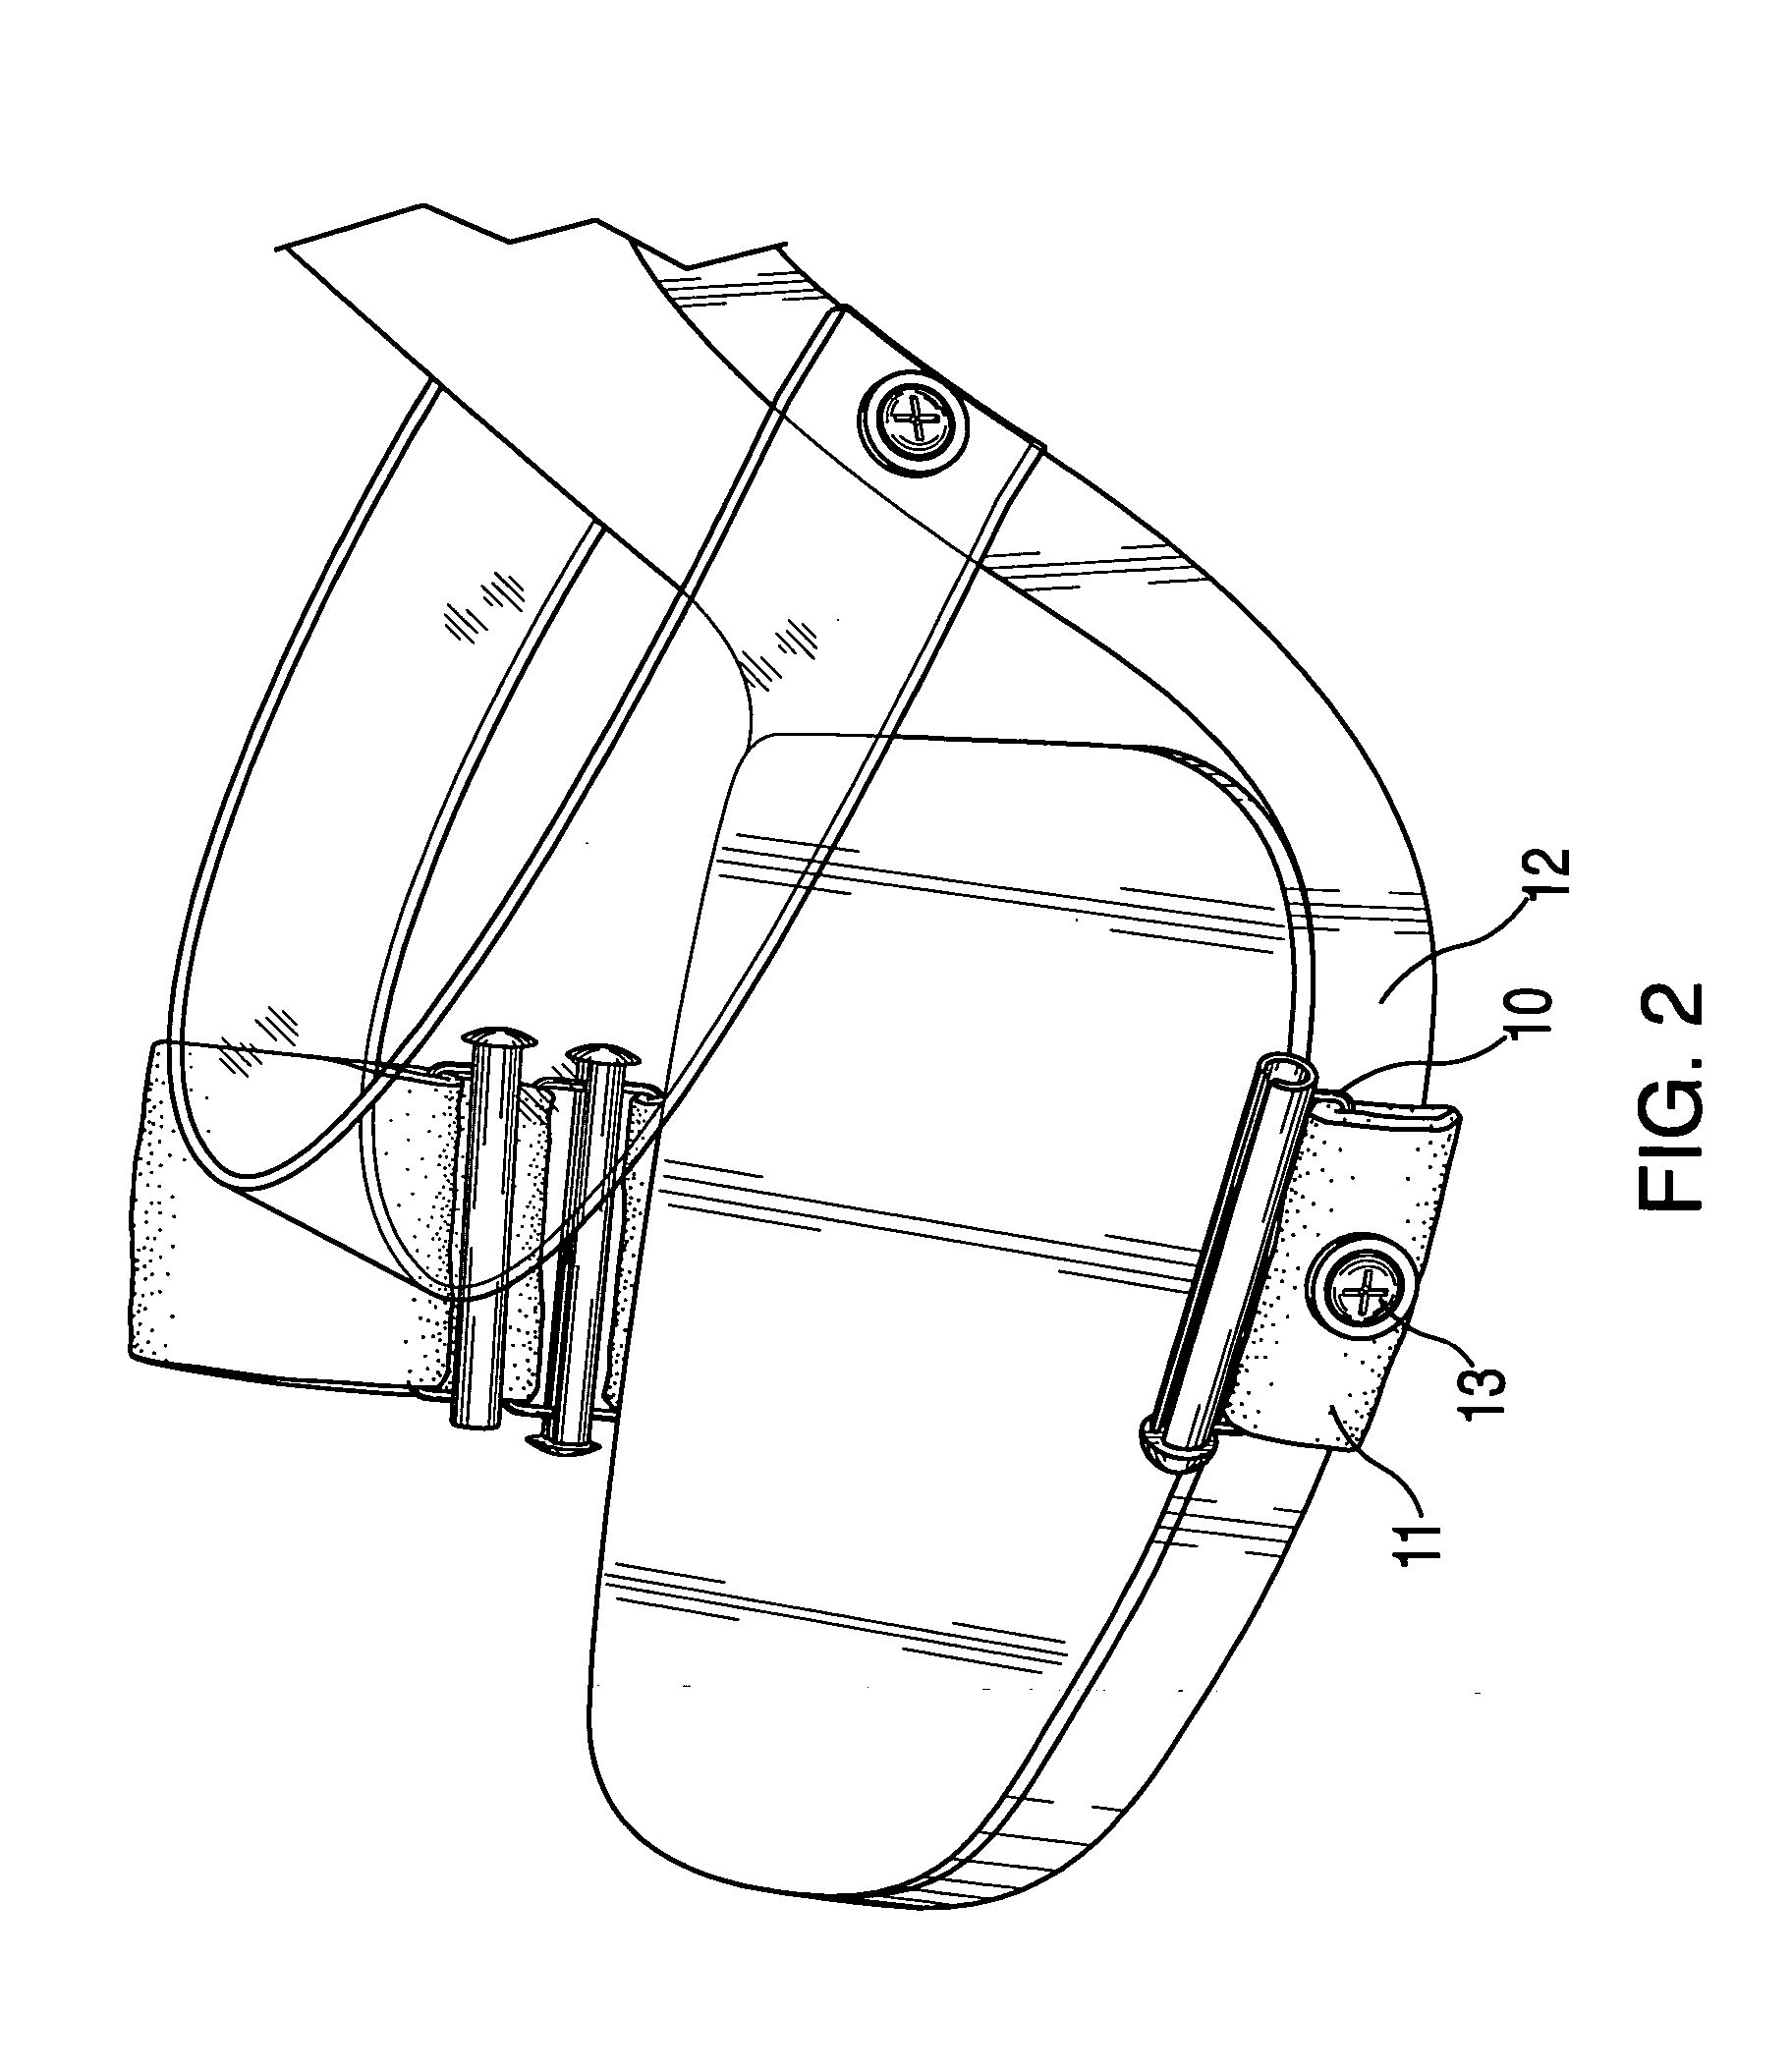 Locking mechanism for securing detachable shoe uppers